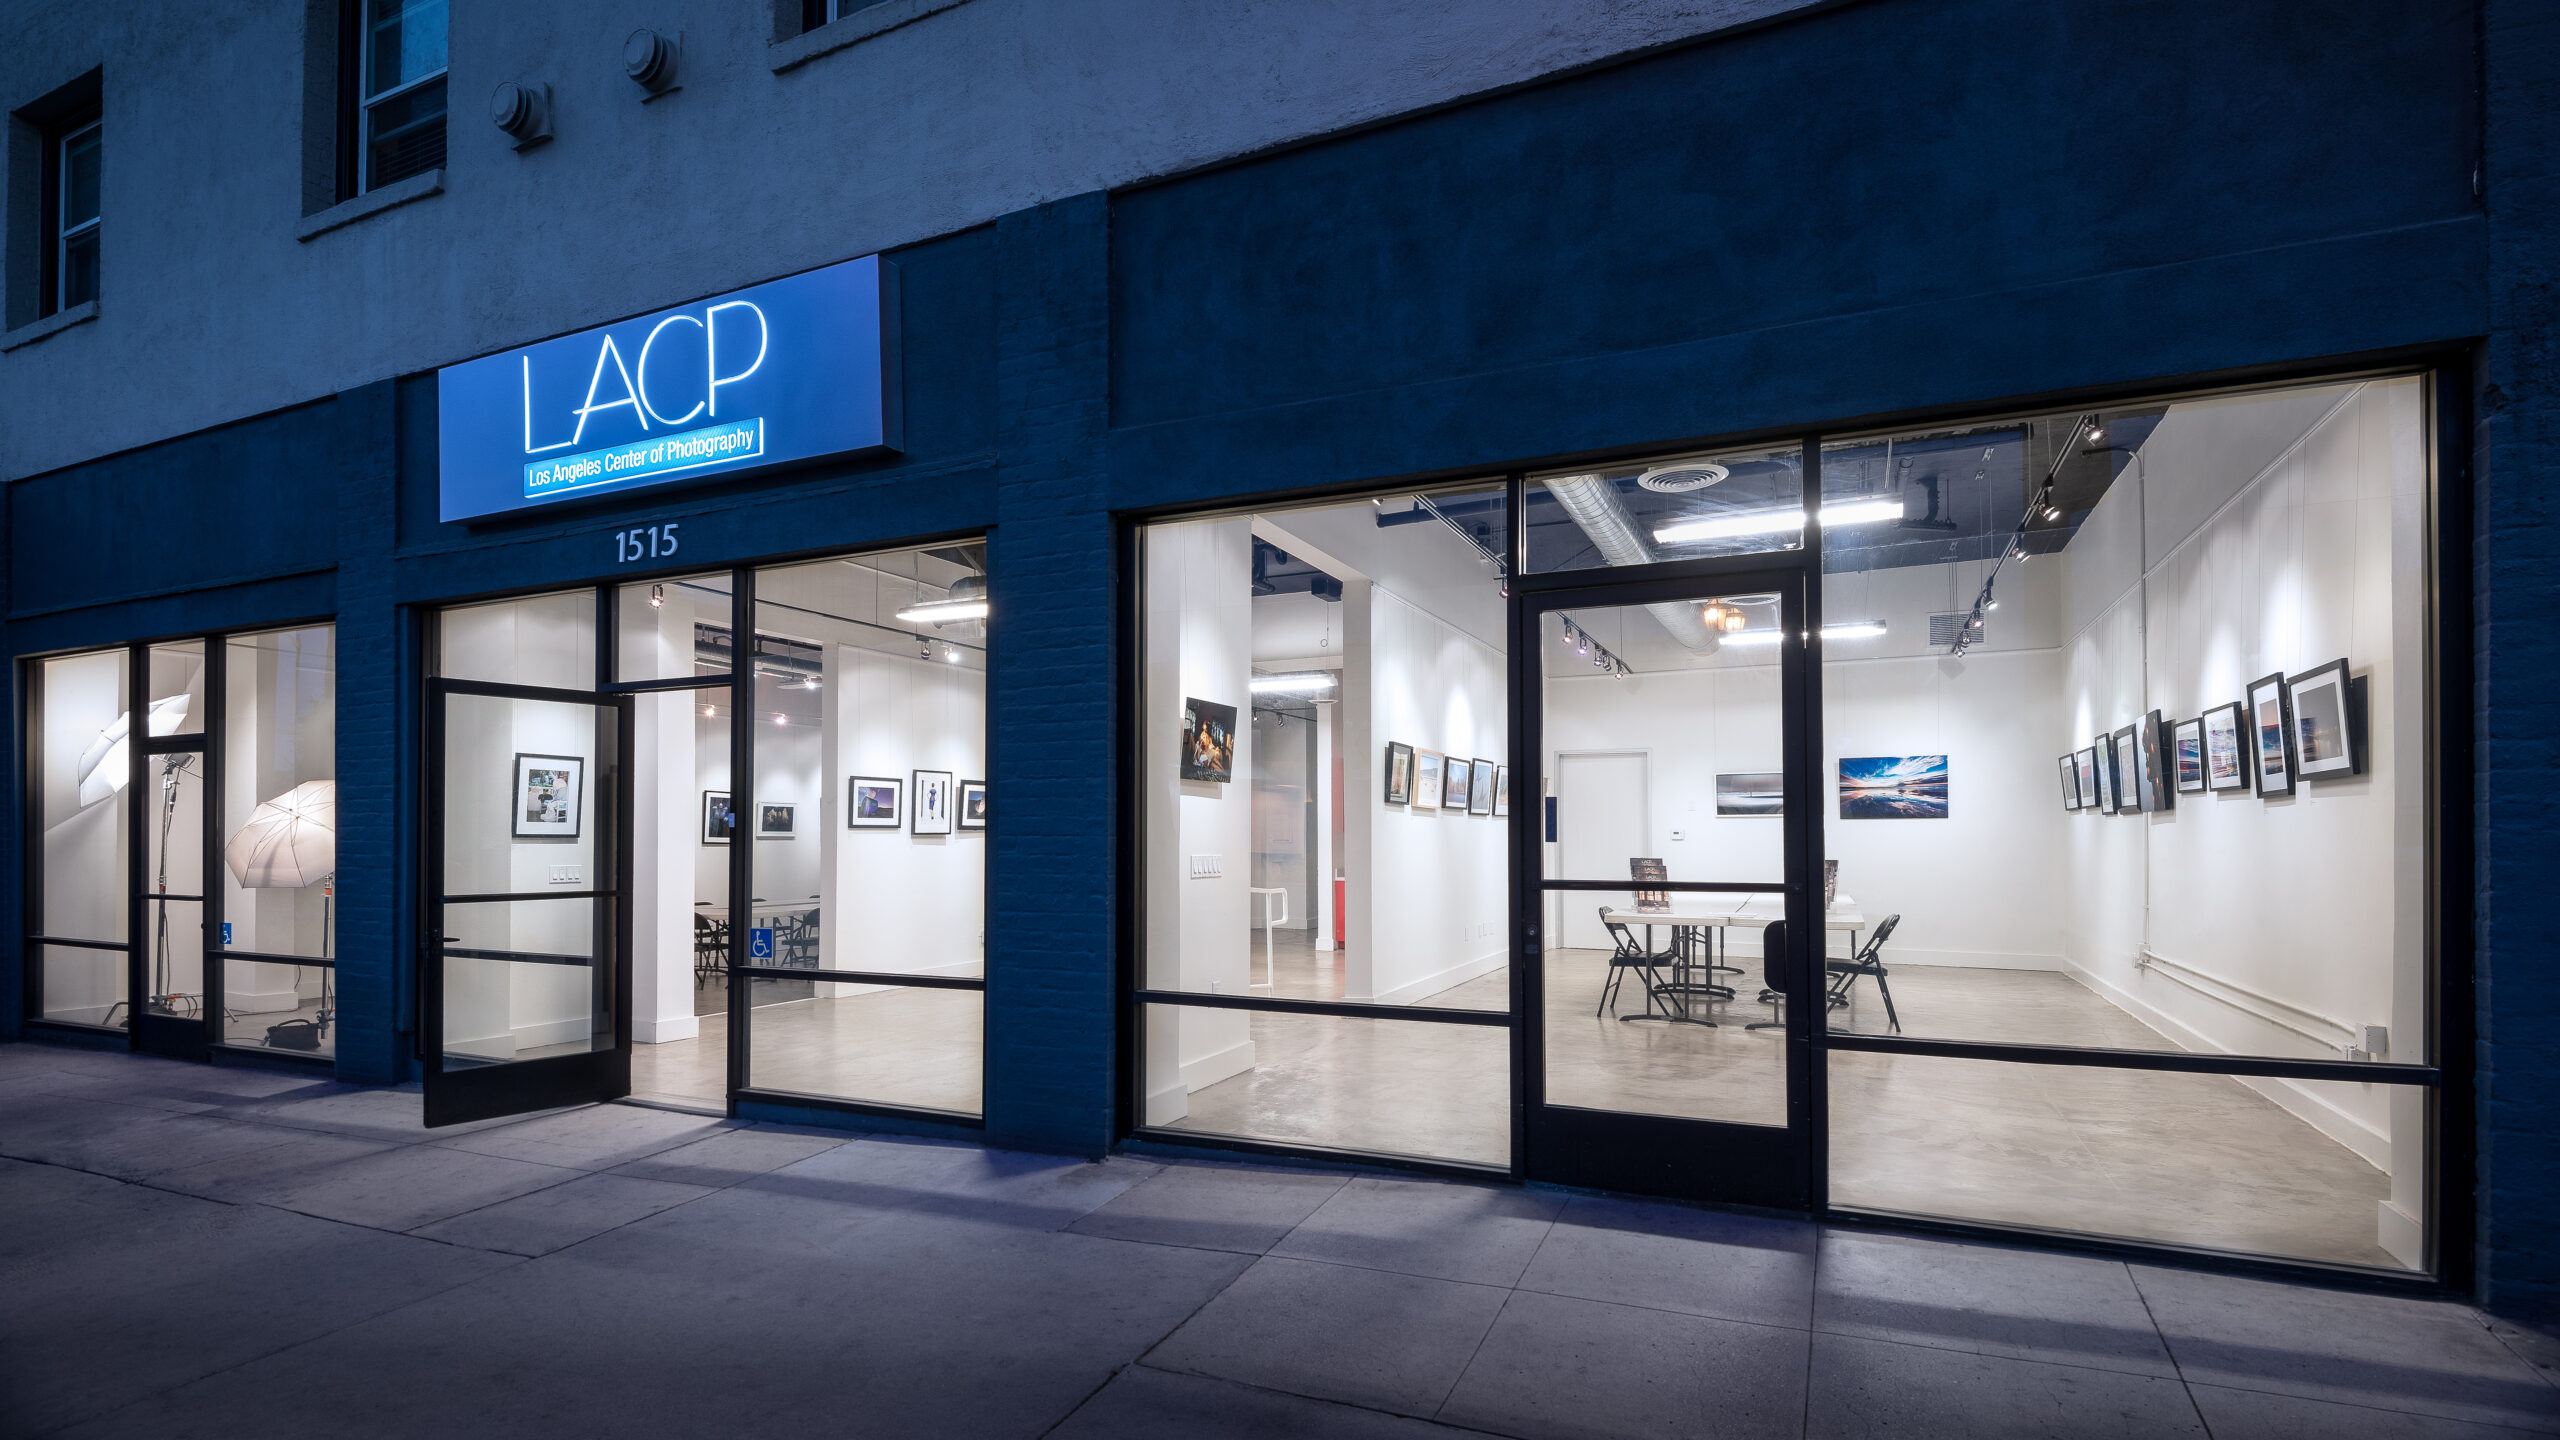 Los Angeles Center For Photography (LACP)